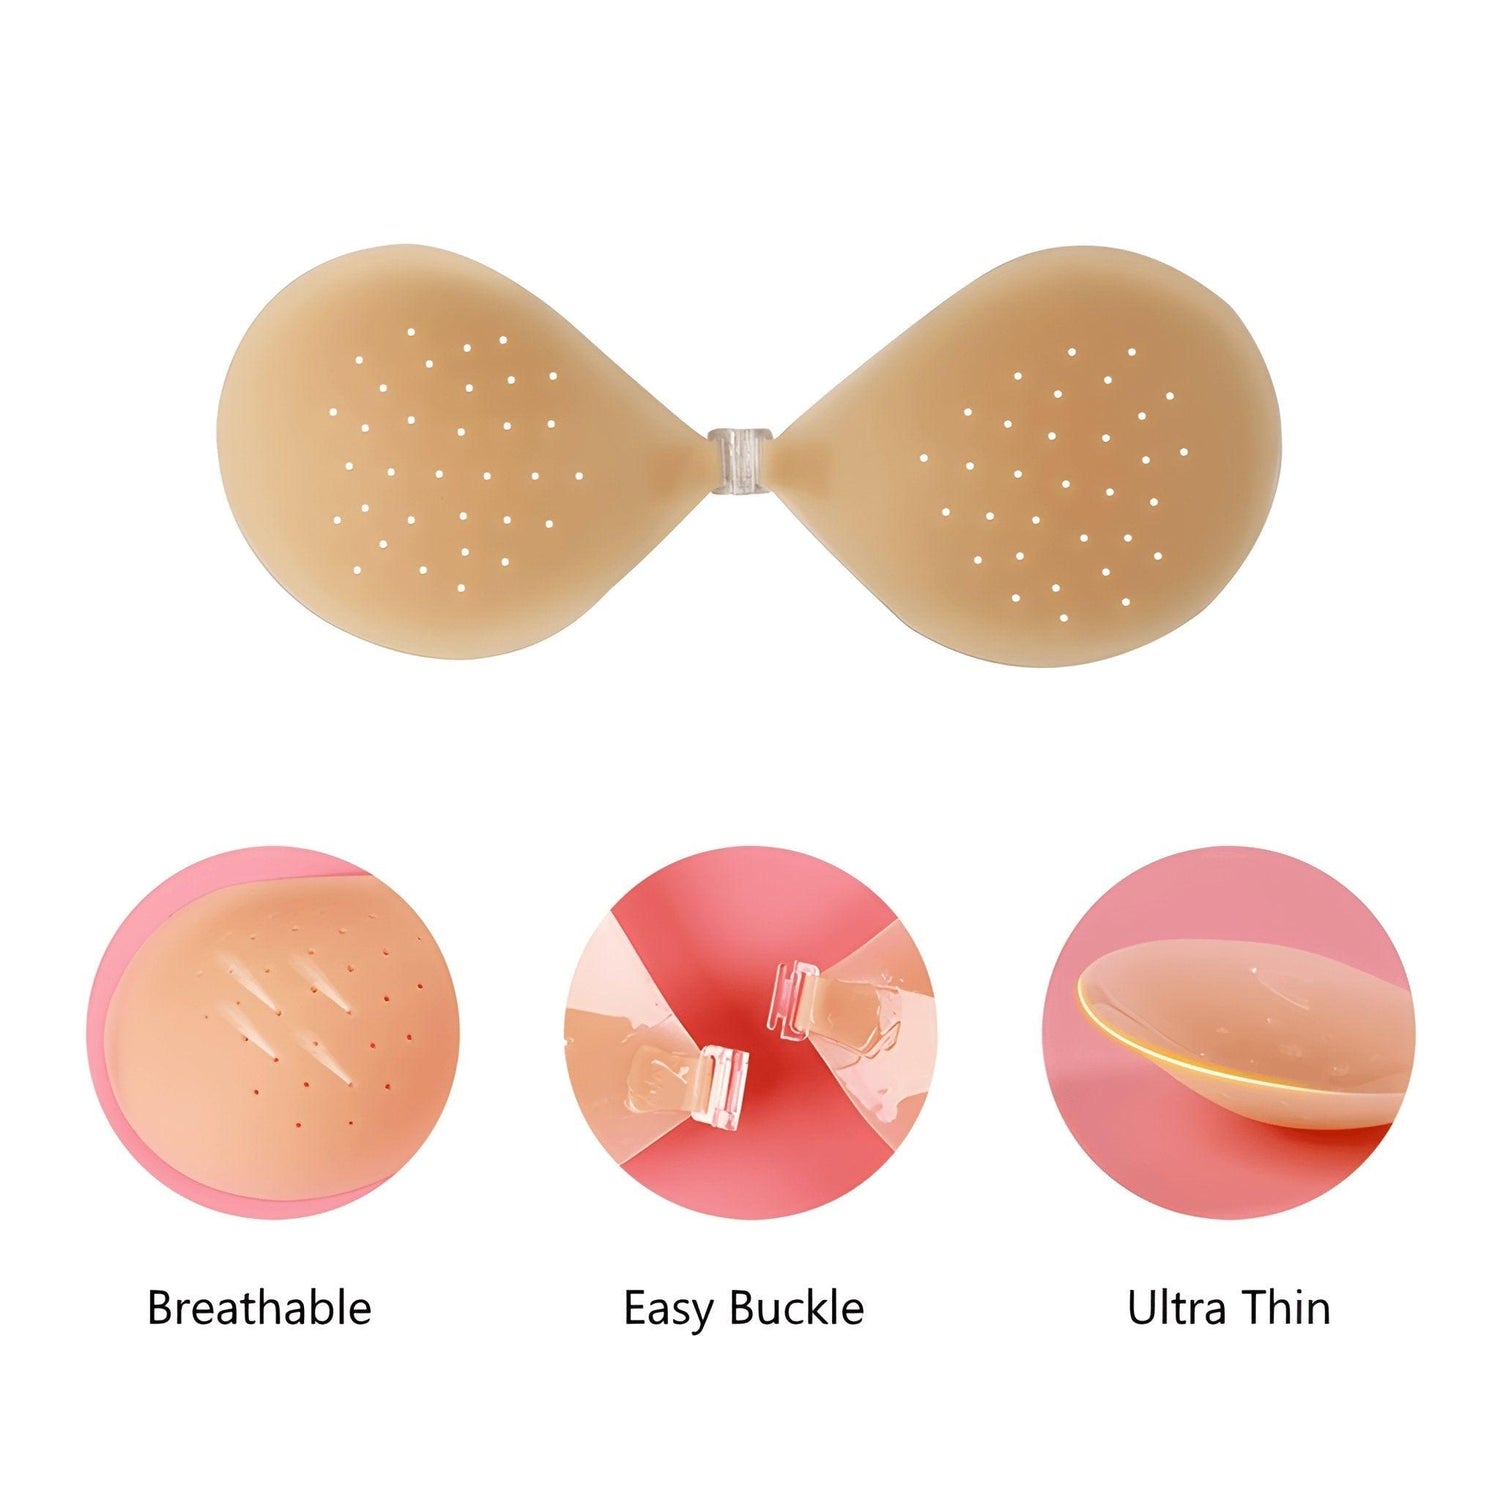 BRA101 PT 3: $13 Adhesive Push Up Bra? Does It Work? Supportive